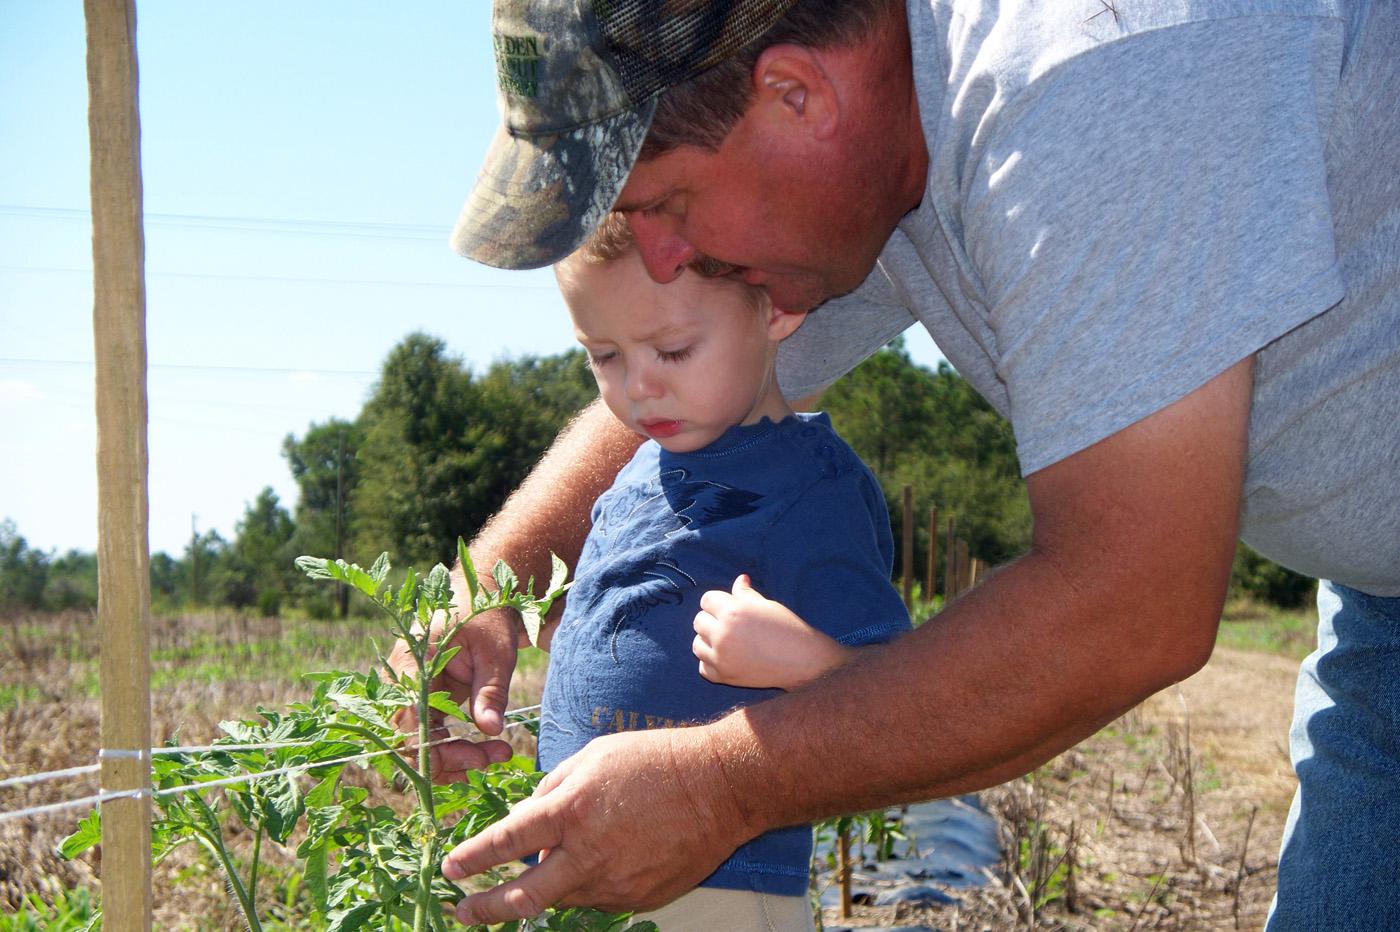 Mike Steede, pictured with his nephew Gunter, and his family operate a community supported agriculture program on land their family has farmed for over a century.